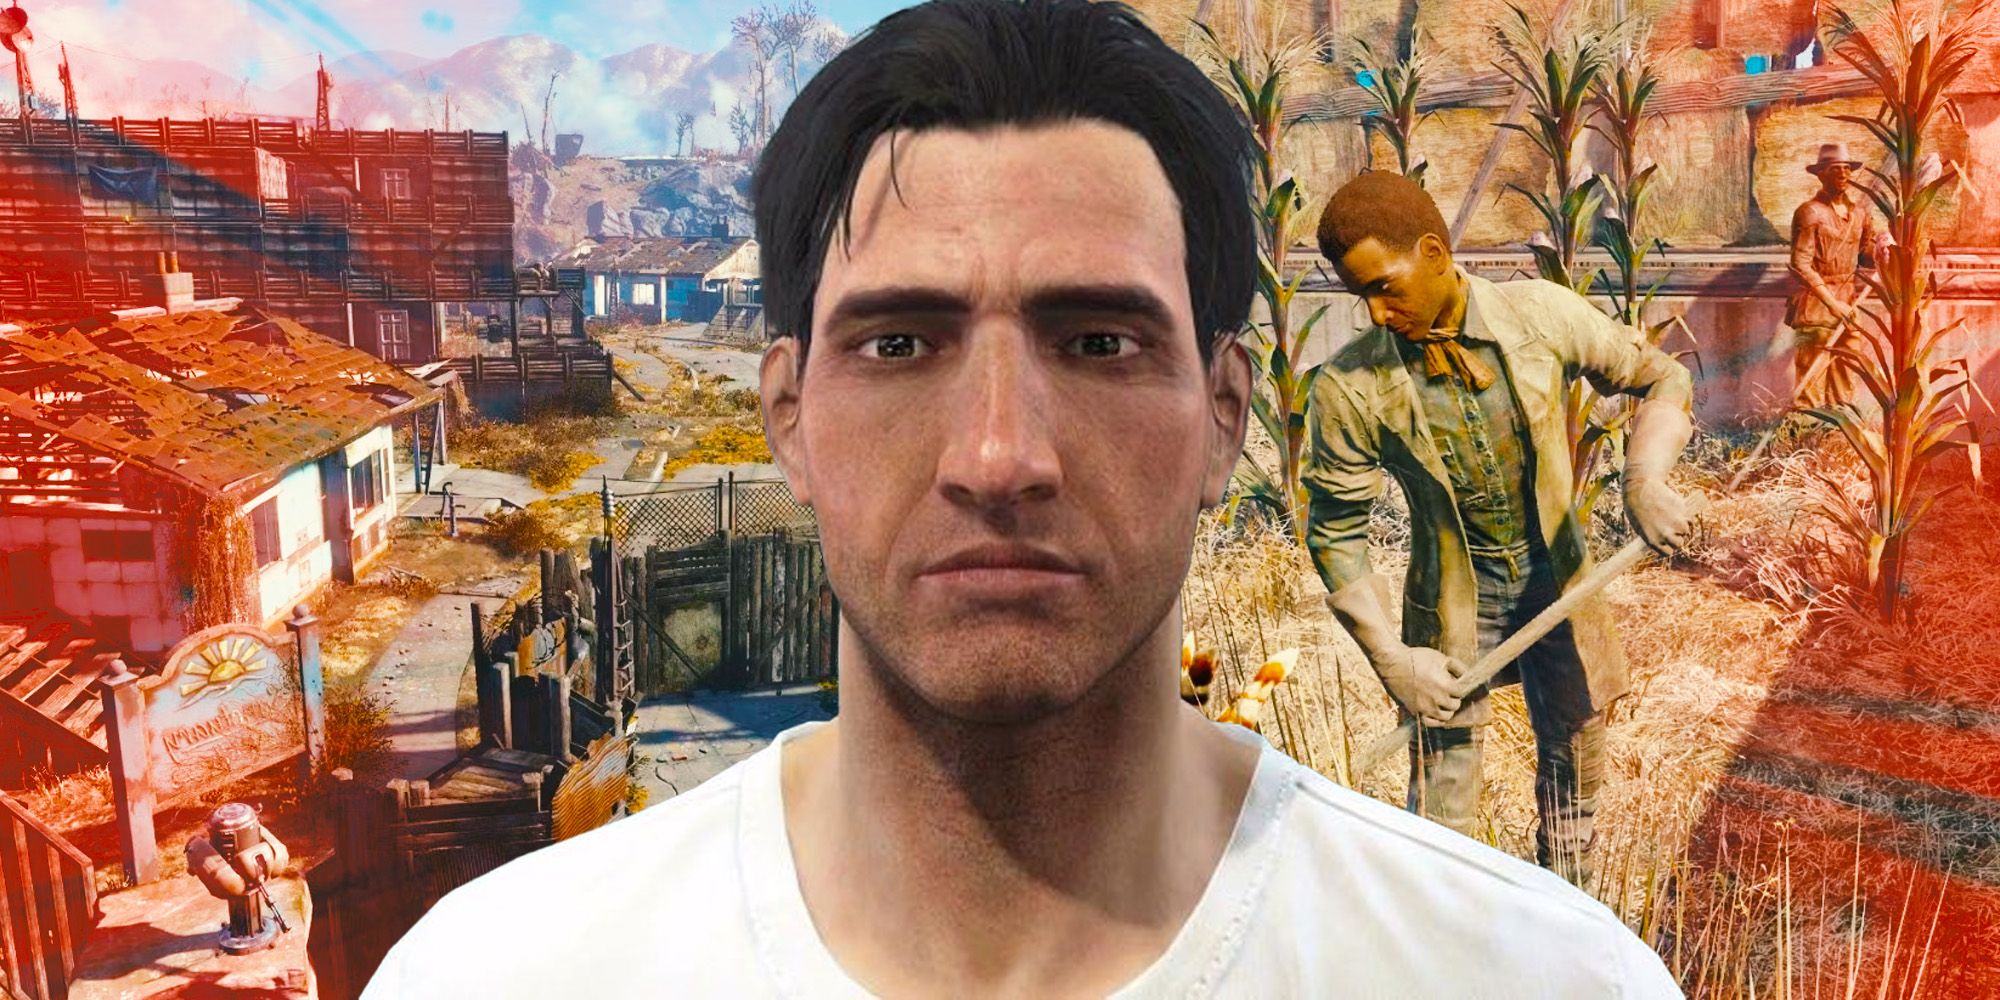 A character from Fallout 4 with a settlement in the background